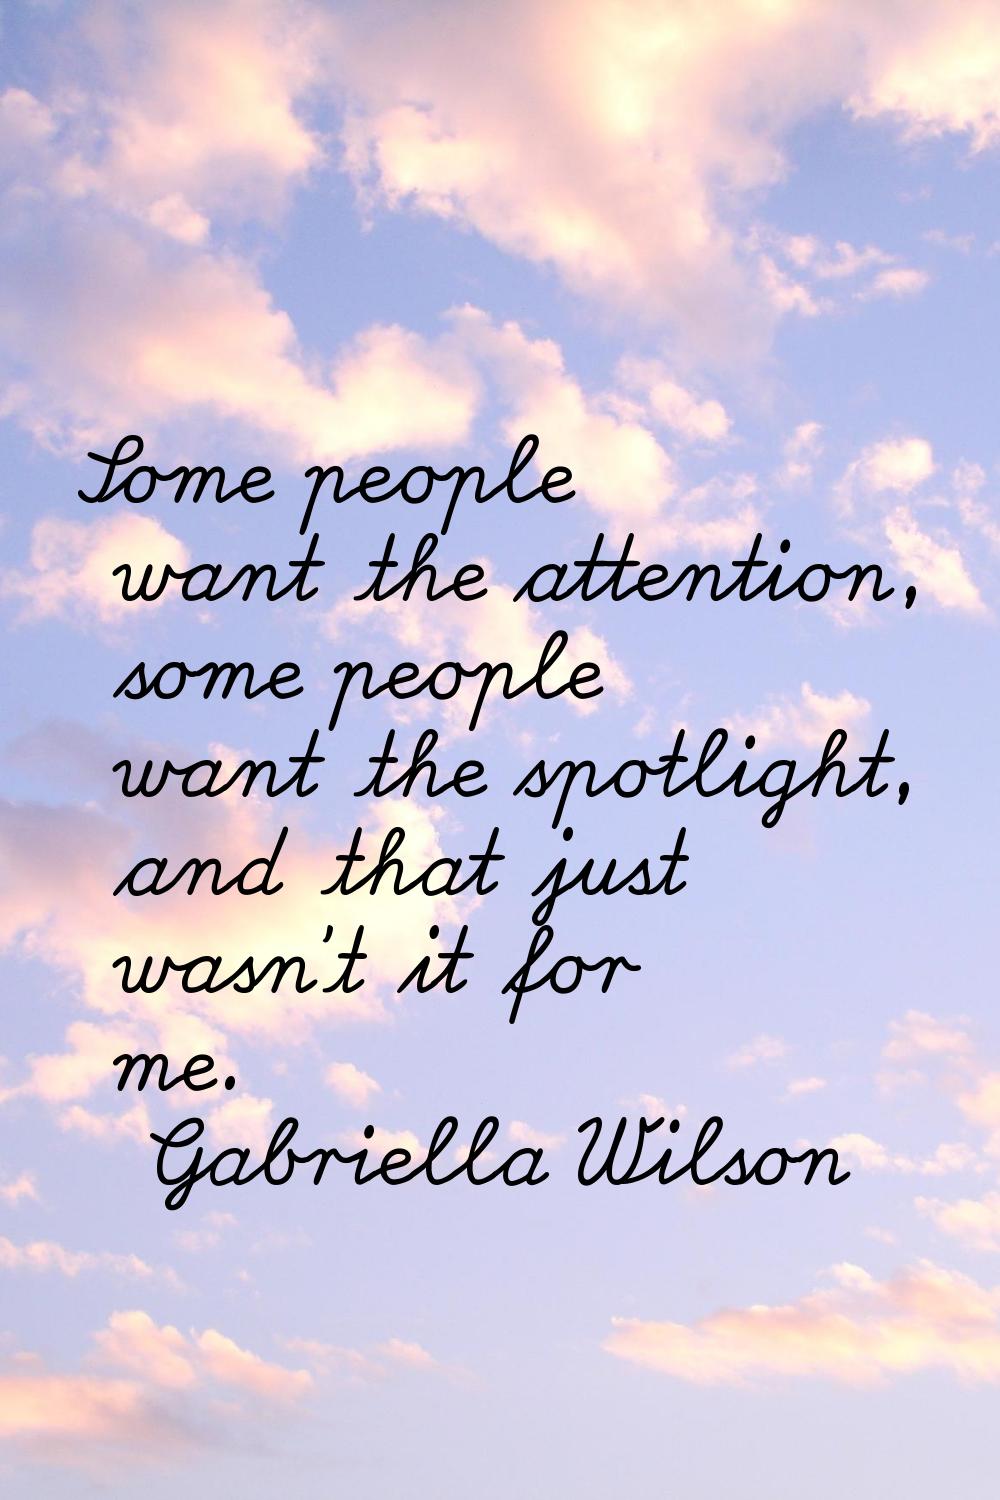 Some people want the attention, some people want the spotlight, and that just wasn't it for me.